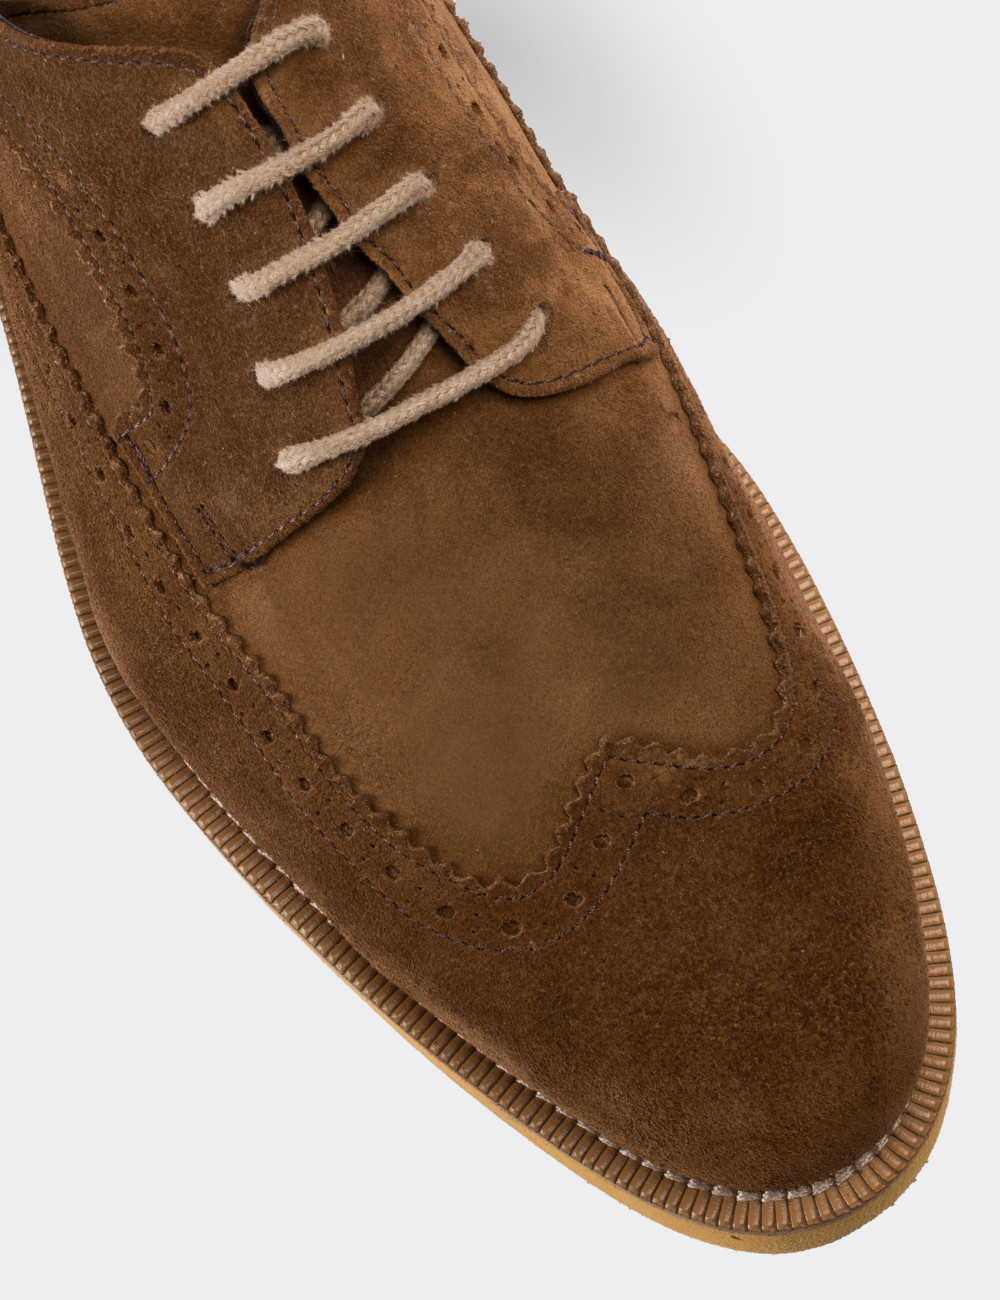 Tan Suede Leather Lace-up Shoes - 01293MTBAE08